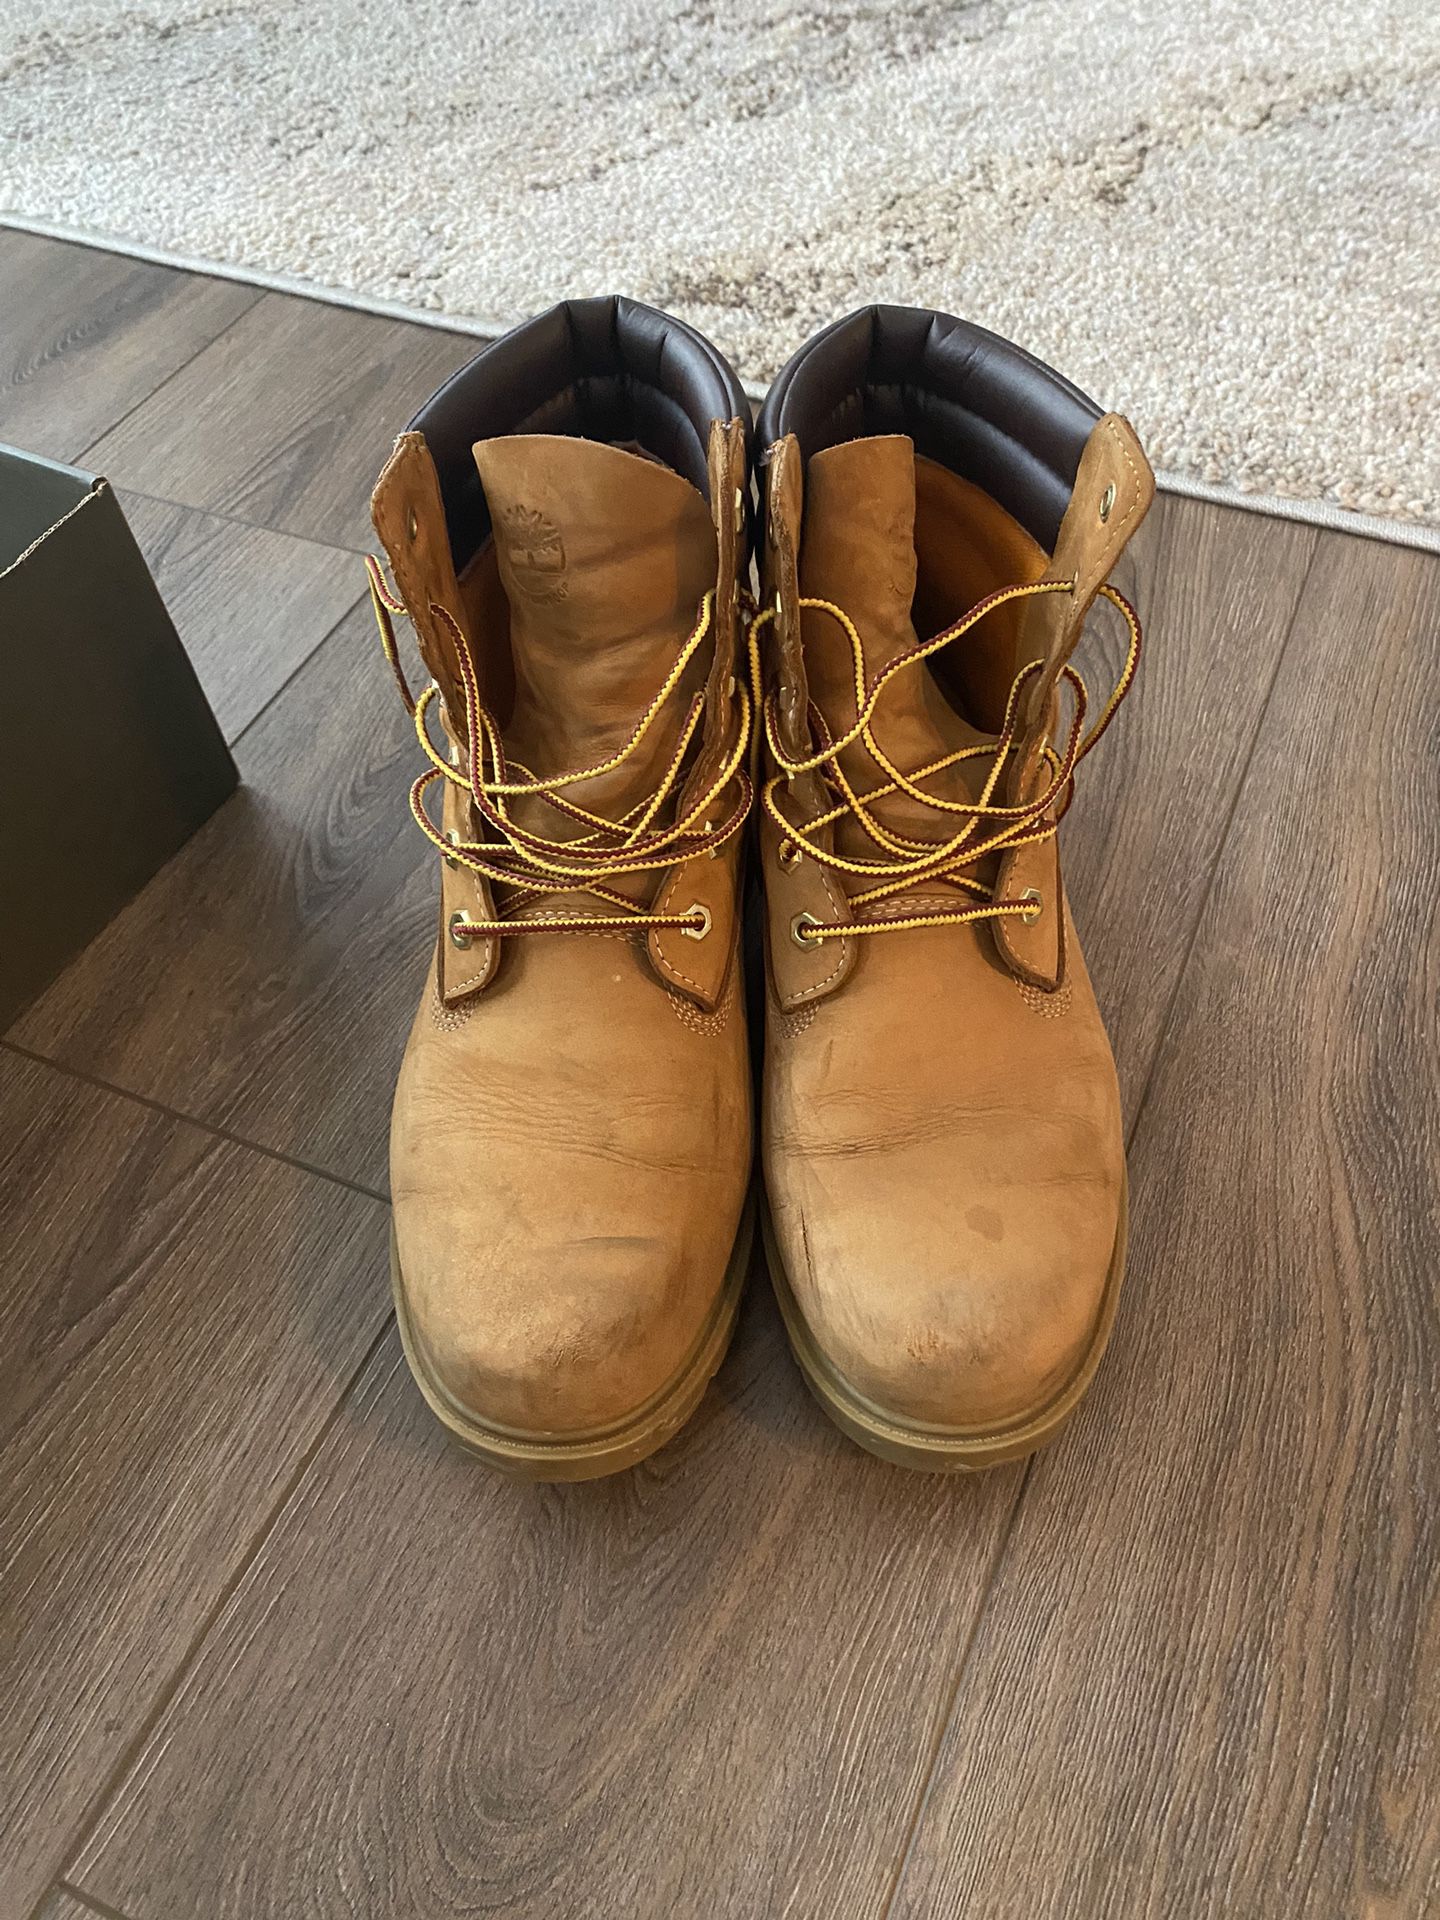 Gently Used Women’s Timberland Boots